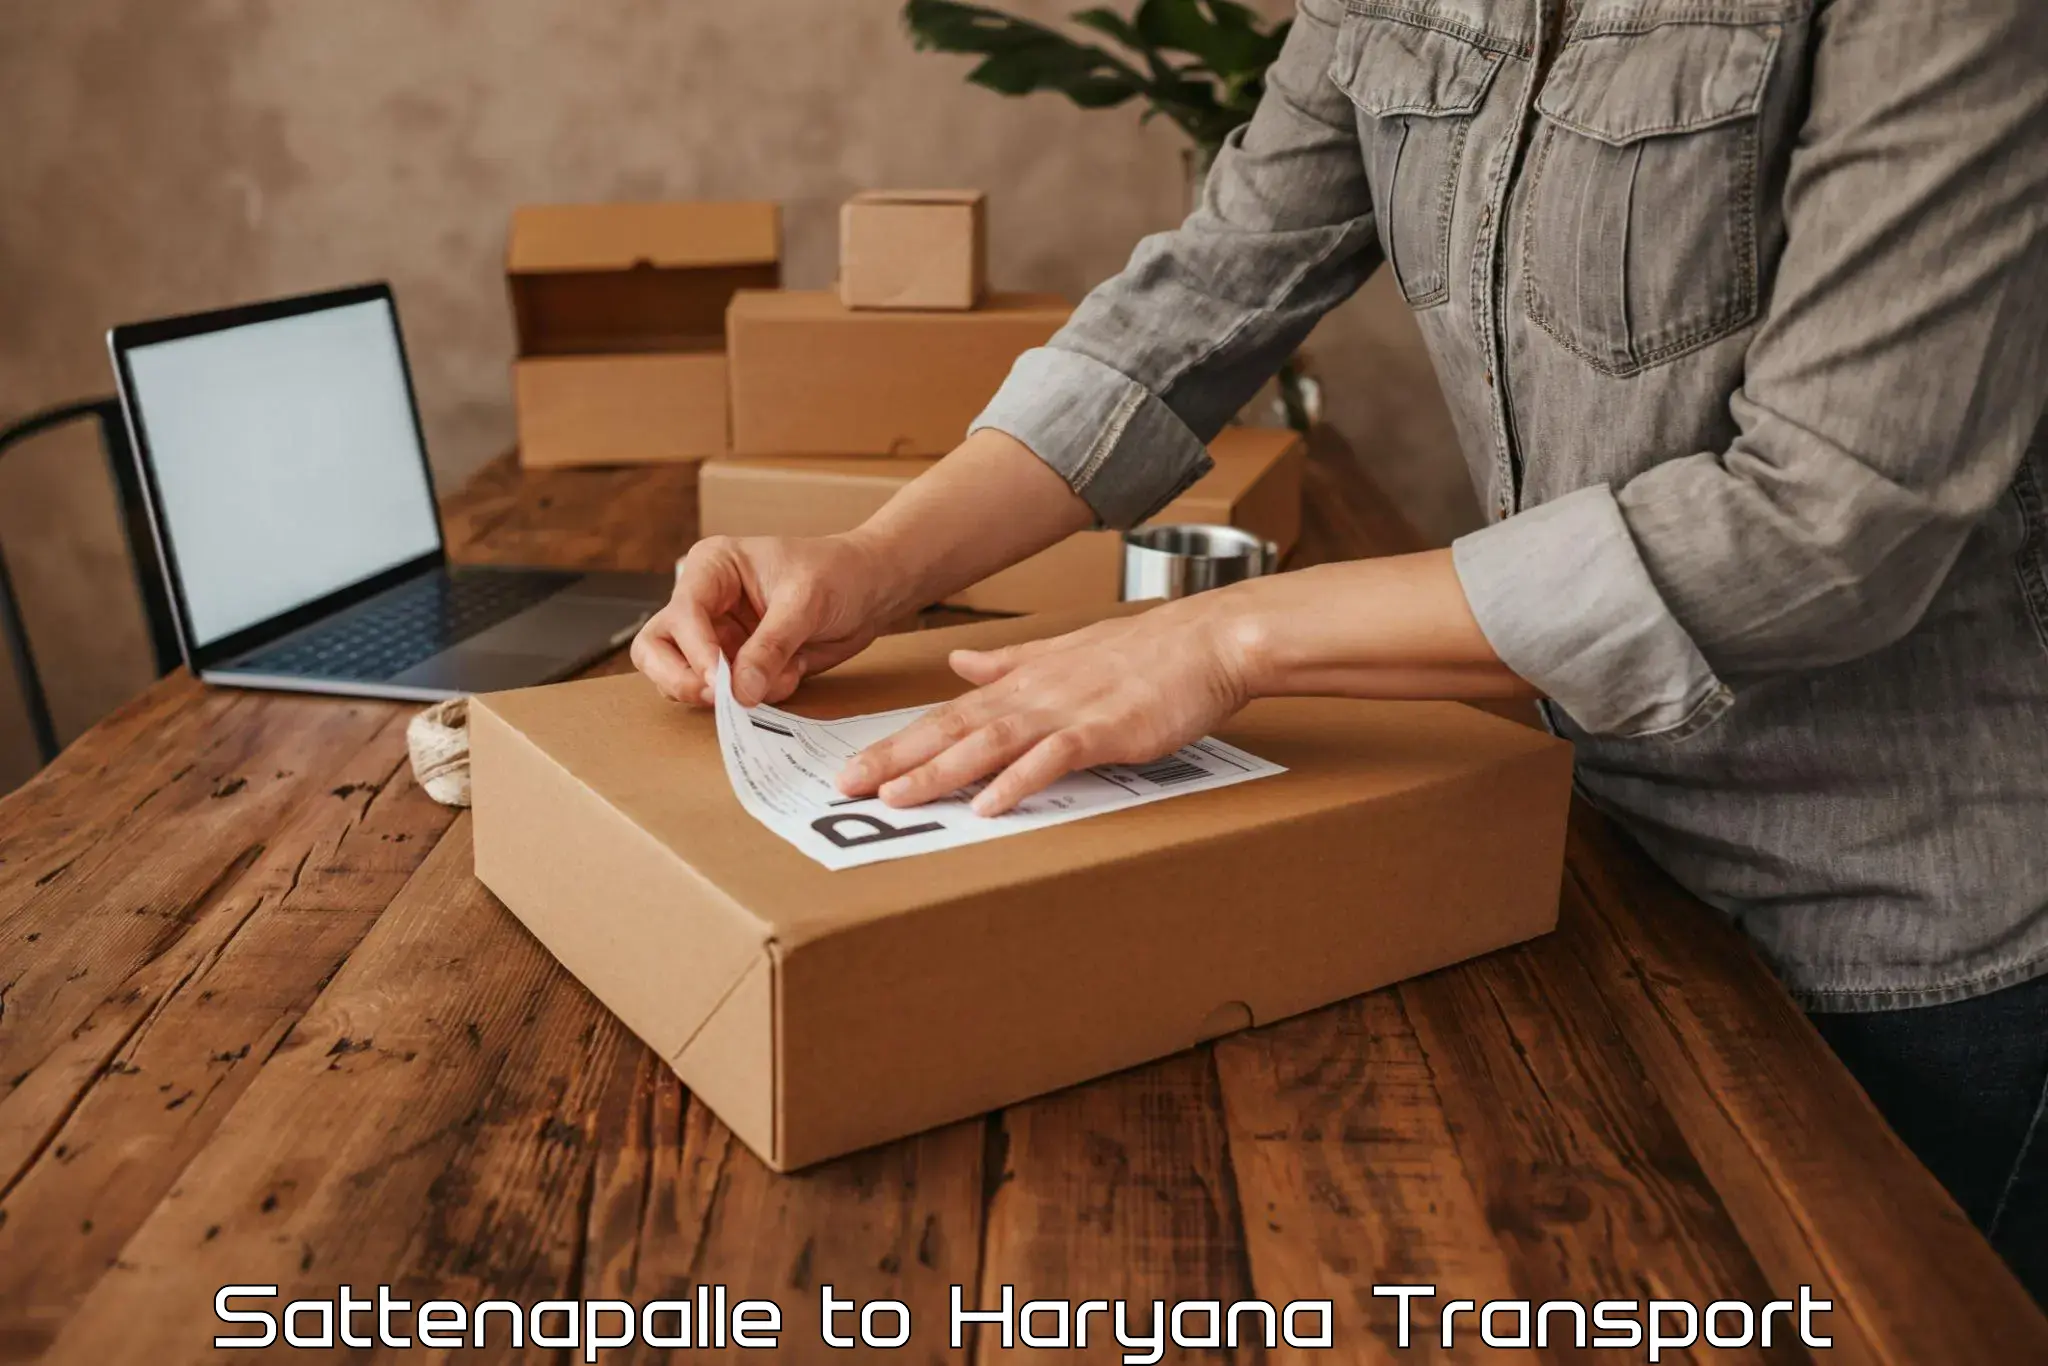 Road transport online services Sattenapalle to NCR Haryana